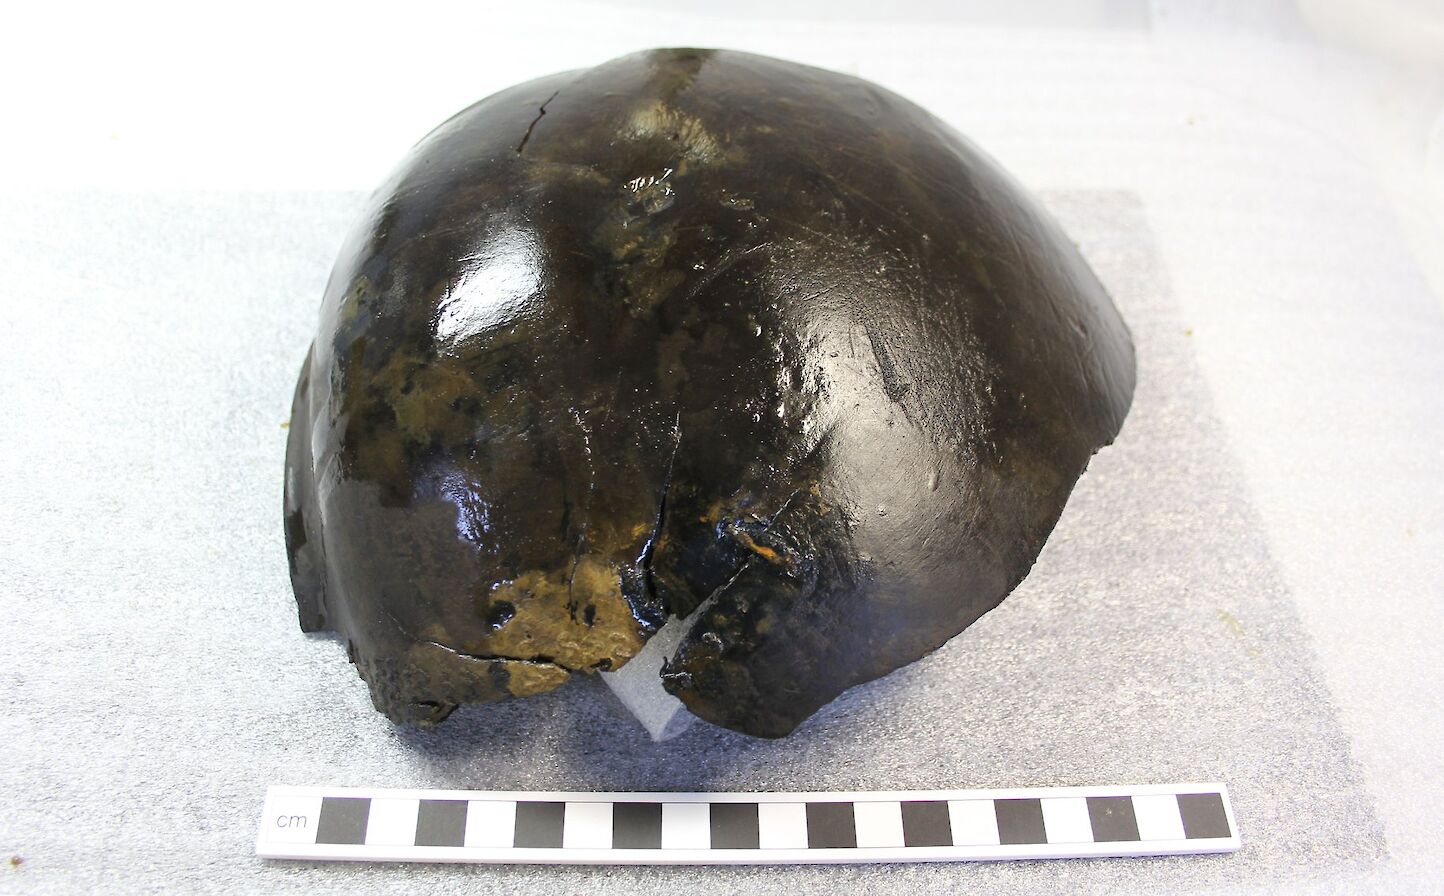 One of the larger pieces of the wooden bowl - image courtesy AOC Archaeology